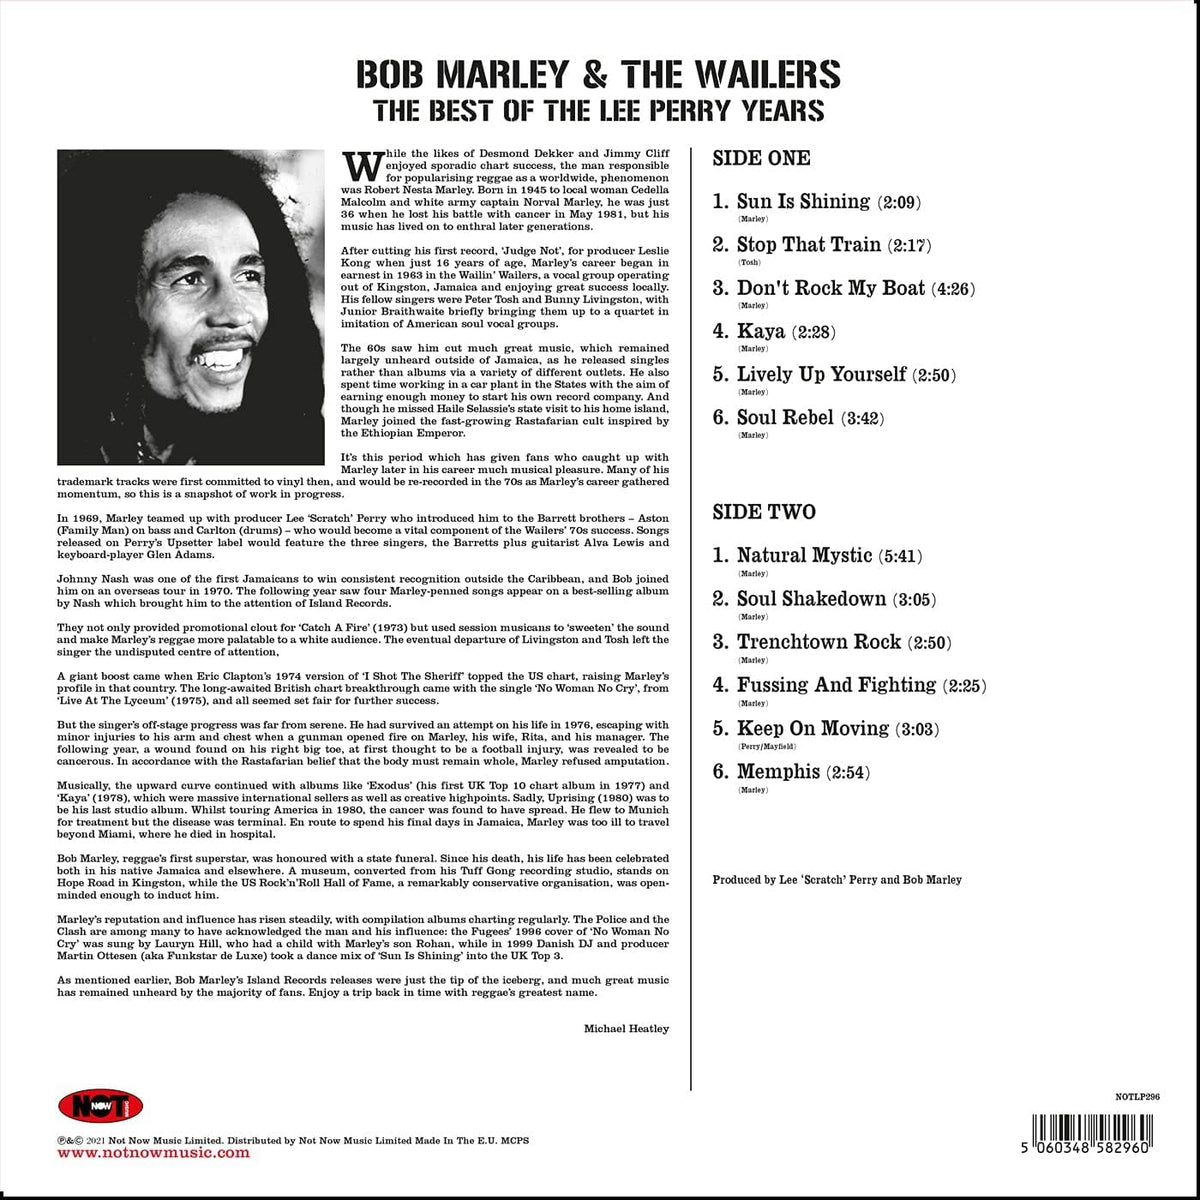 BOB MARLEY - THE BEST OF THE LEE PERRY YEARS [VINYL]